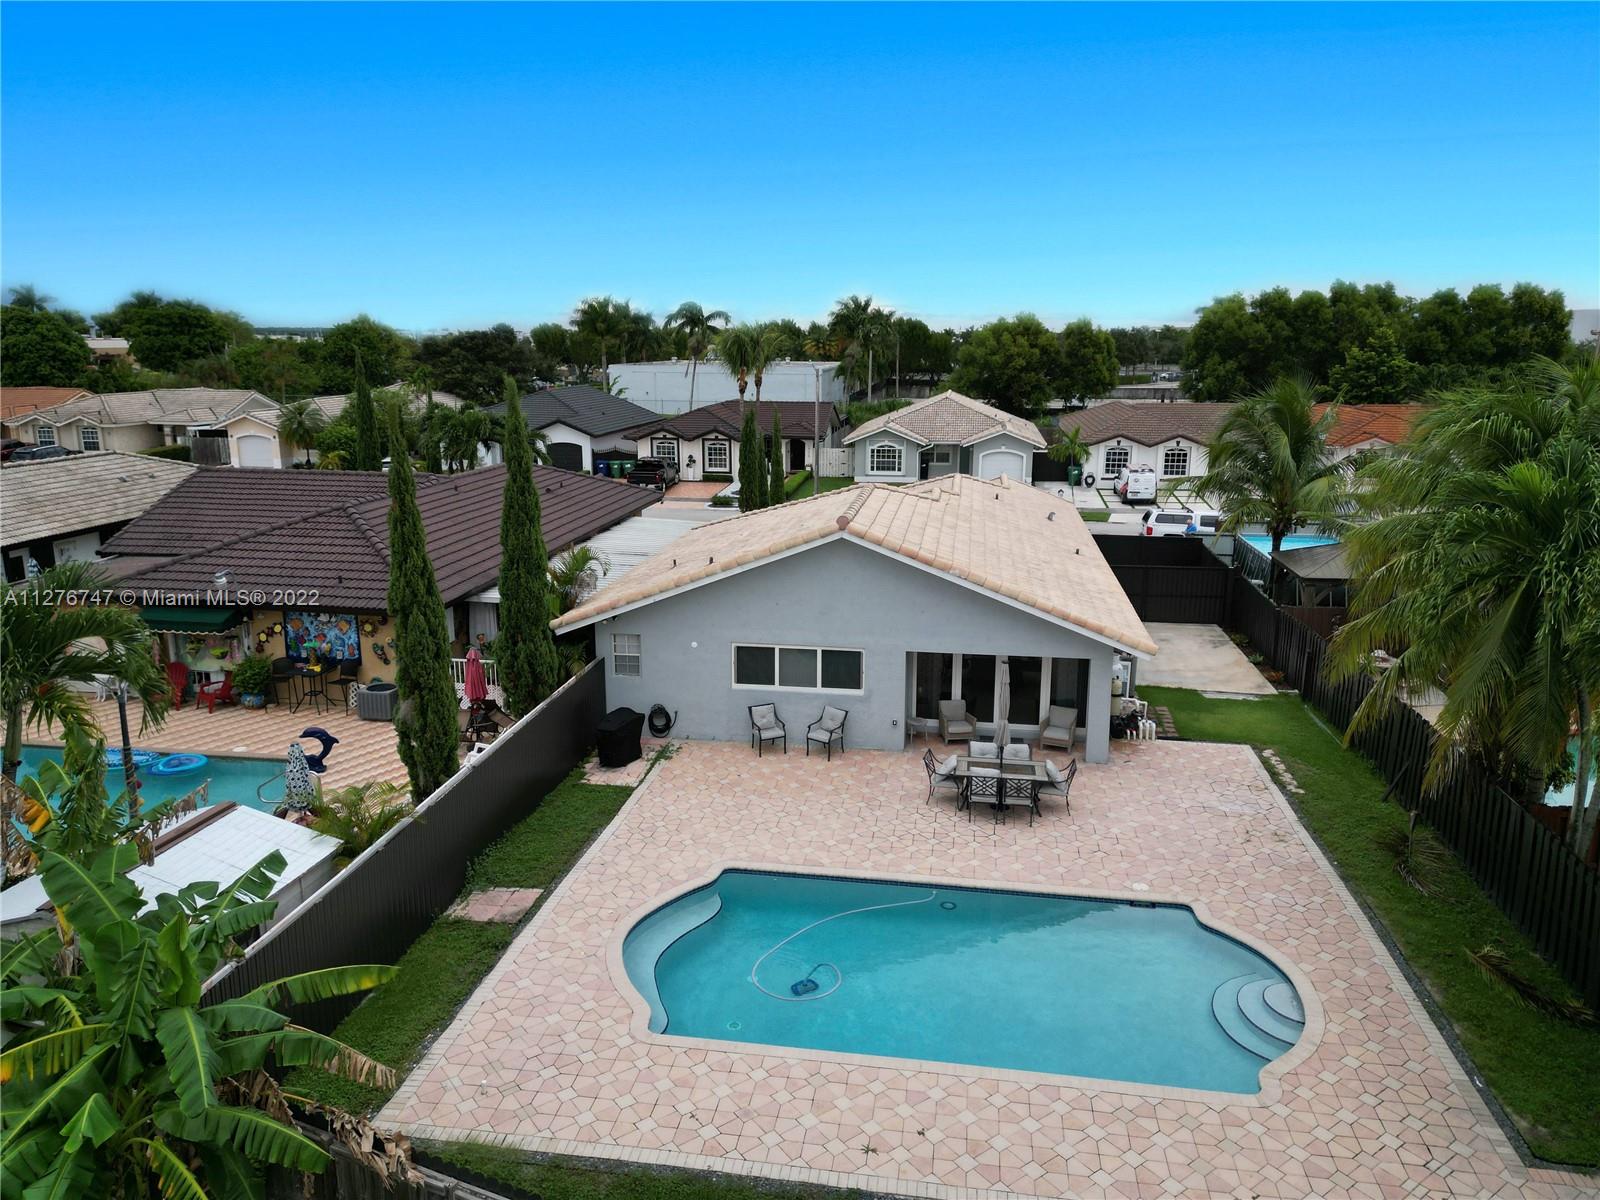 an aerial view of a house with swimming pool garden view and mountains